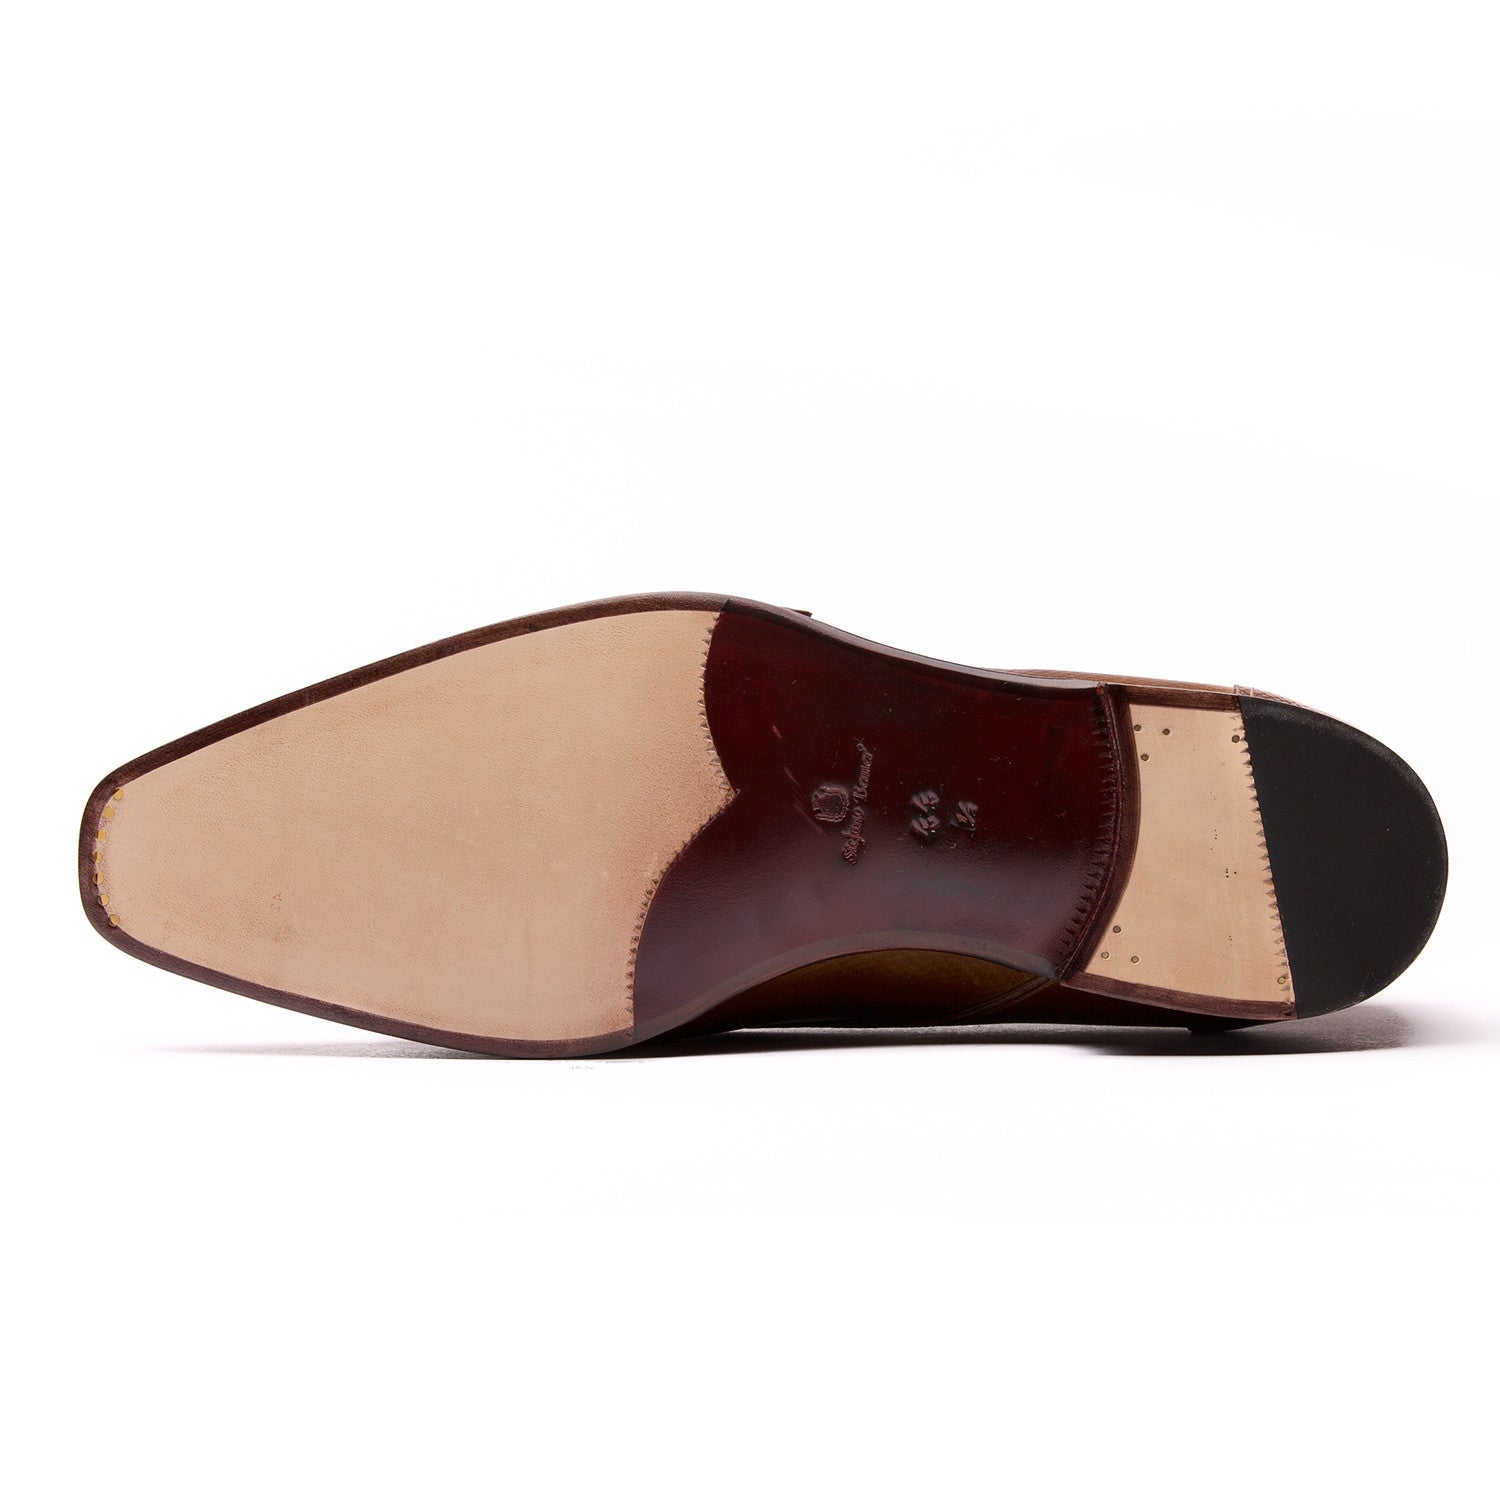 Stefano Bemer Style 2310 - Cinnamon Horsefront - Sole View